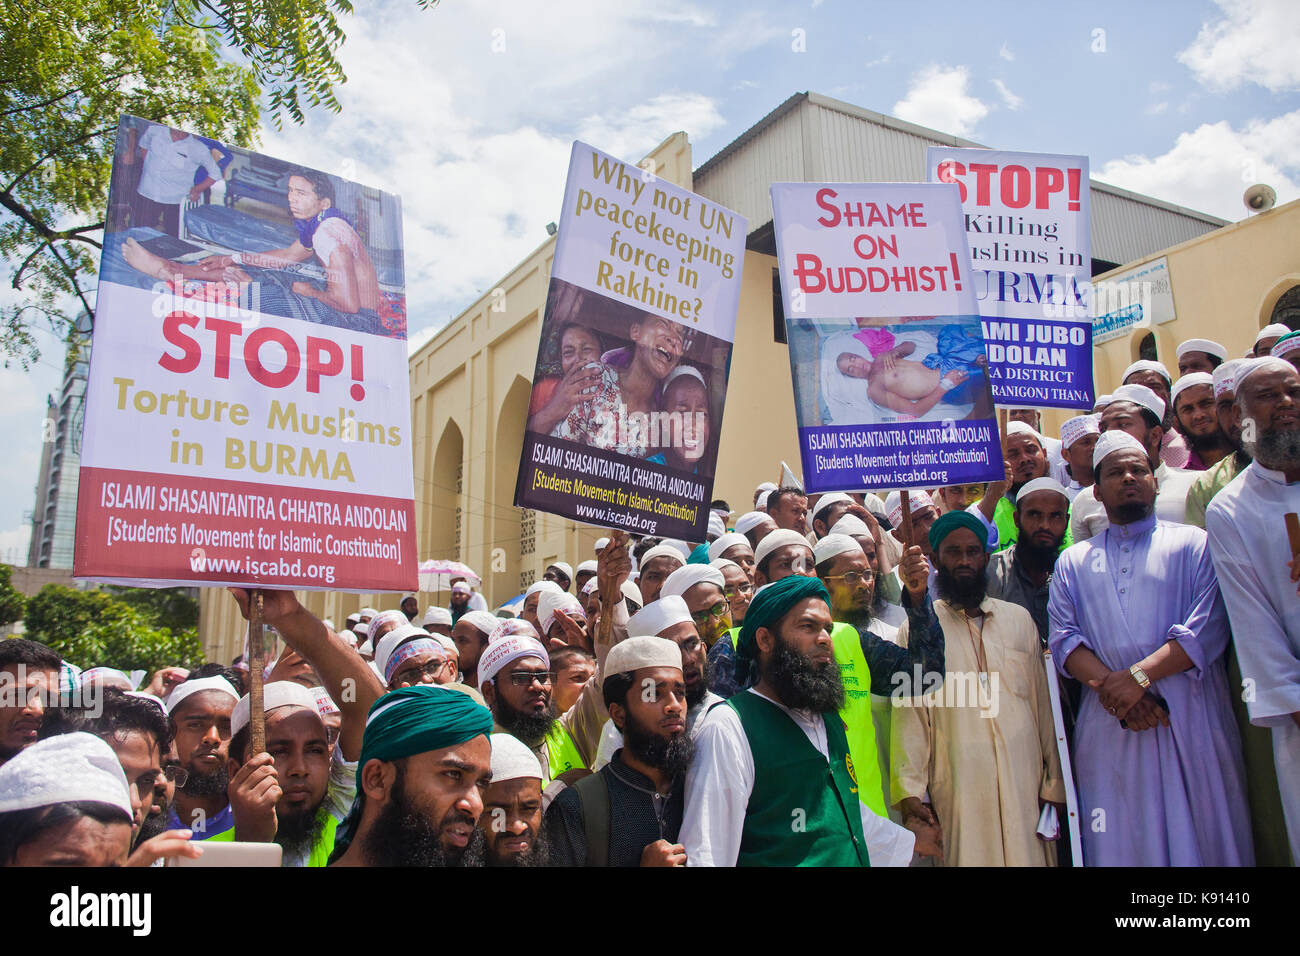 Dhaka, Bangladesh. 21st Sep, 2017. Supporters of the Islami Andolan Bangladesh participate in a protest march towards the UN office in Dhaka to protest against the persecution of Rohingya Muslims in Dhaka on September 21, 2017. Photo: Fahad Kaizer Credit: Fahad Kaizer/Alamy Live News Stock Photo